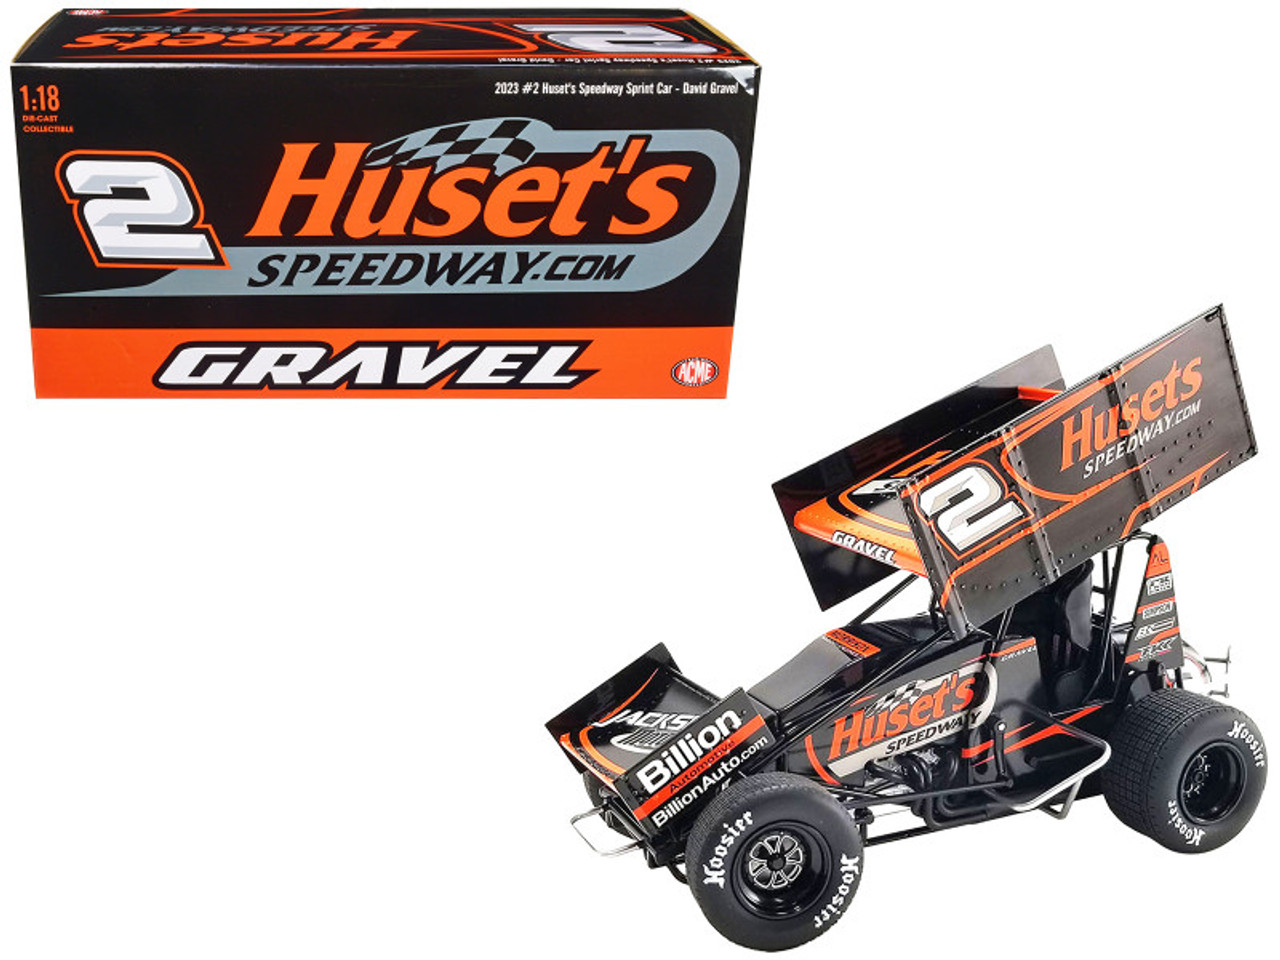 Winged Sprint Car #2 David Gravel "Huset's Speedway" Big Game Motorsports "World of Outlaws" (2023) 1/18 Diecast Model Car by ACME